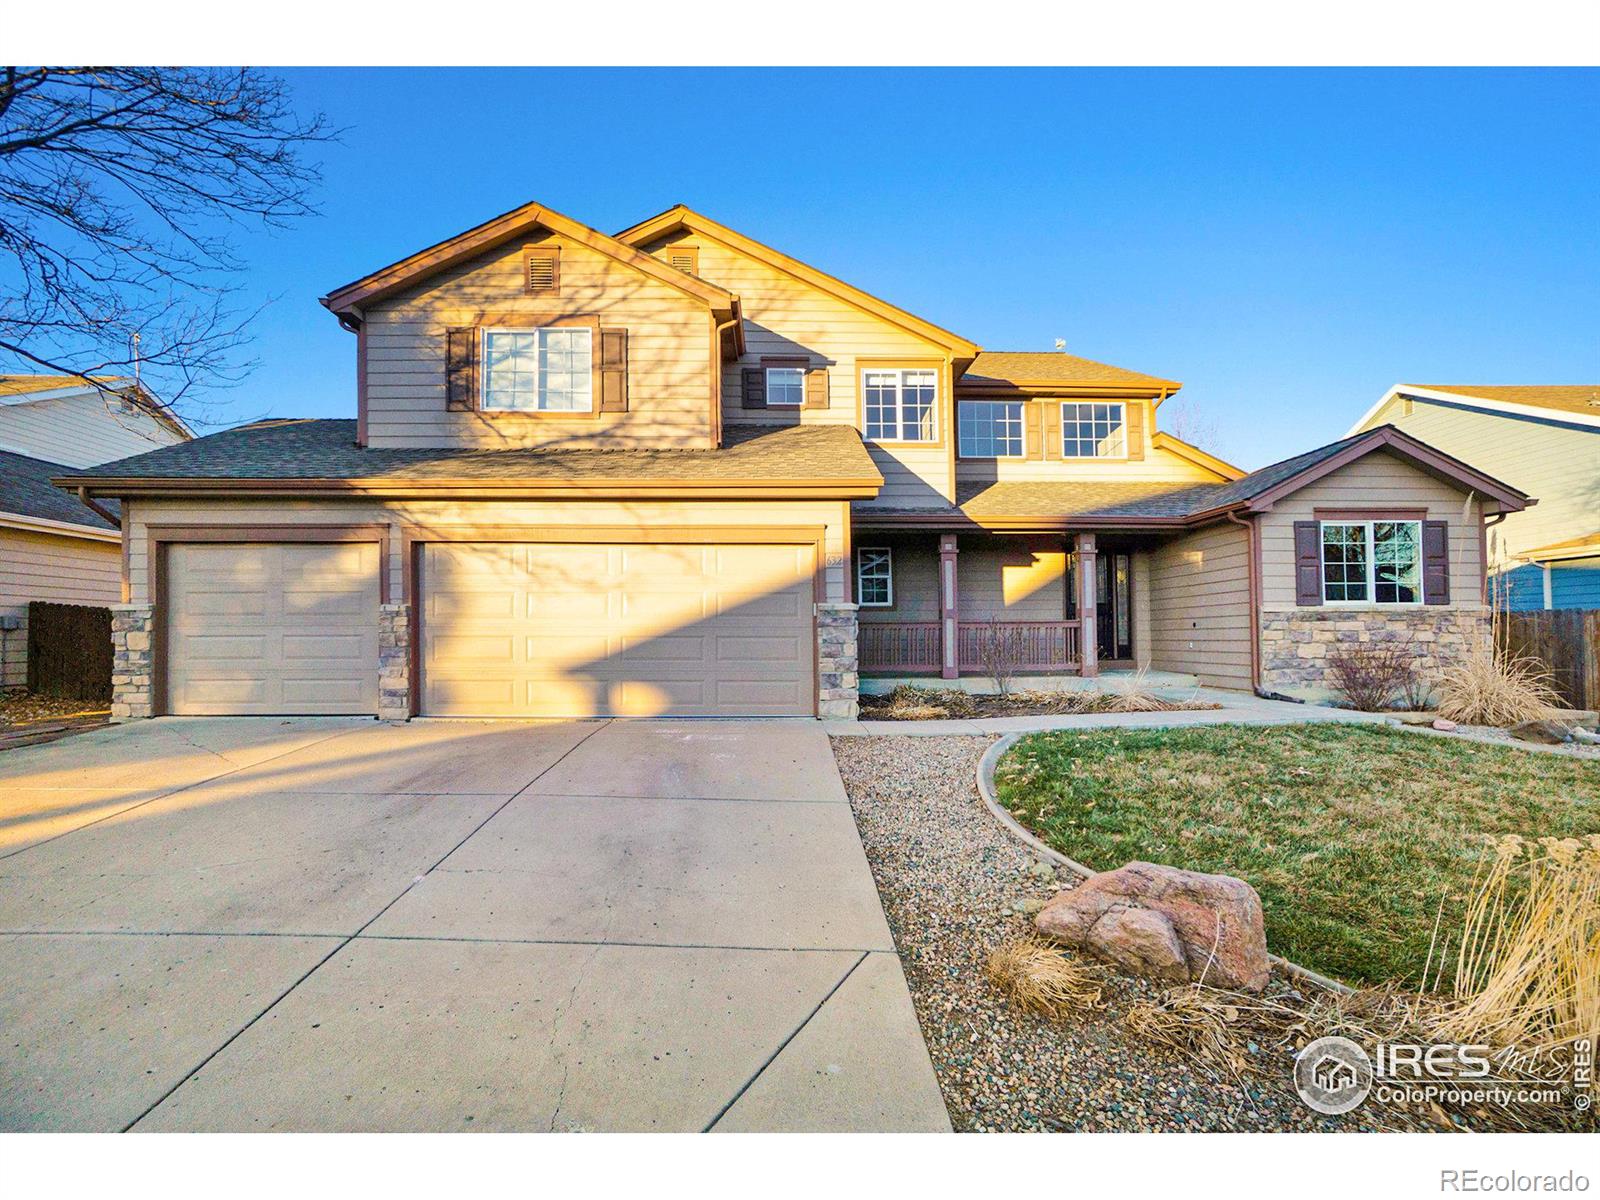 632  Agate Court, fort collins MLS: 4567891001266 Beds: 4 Baths: 4 Price: $690,000